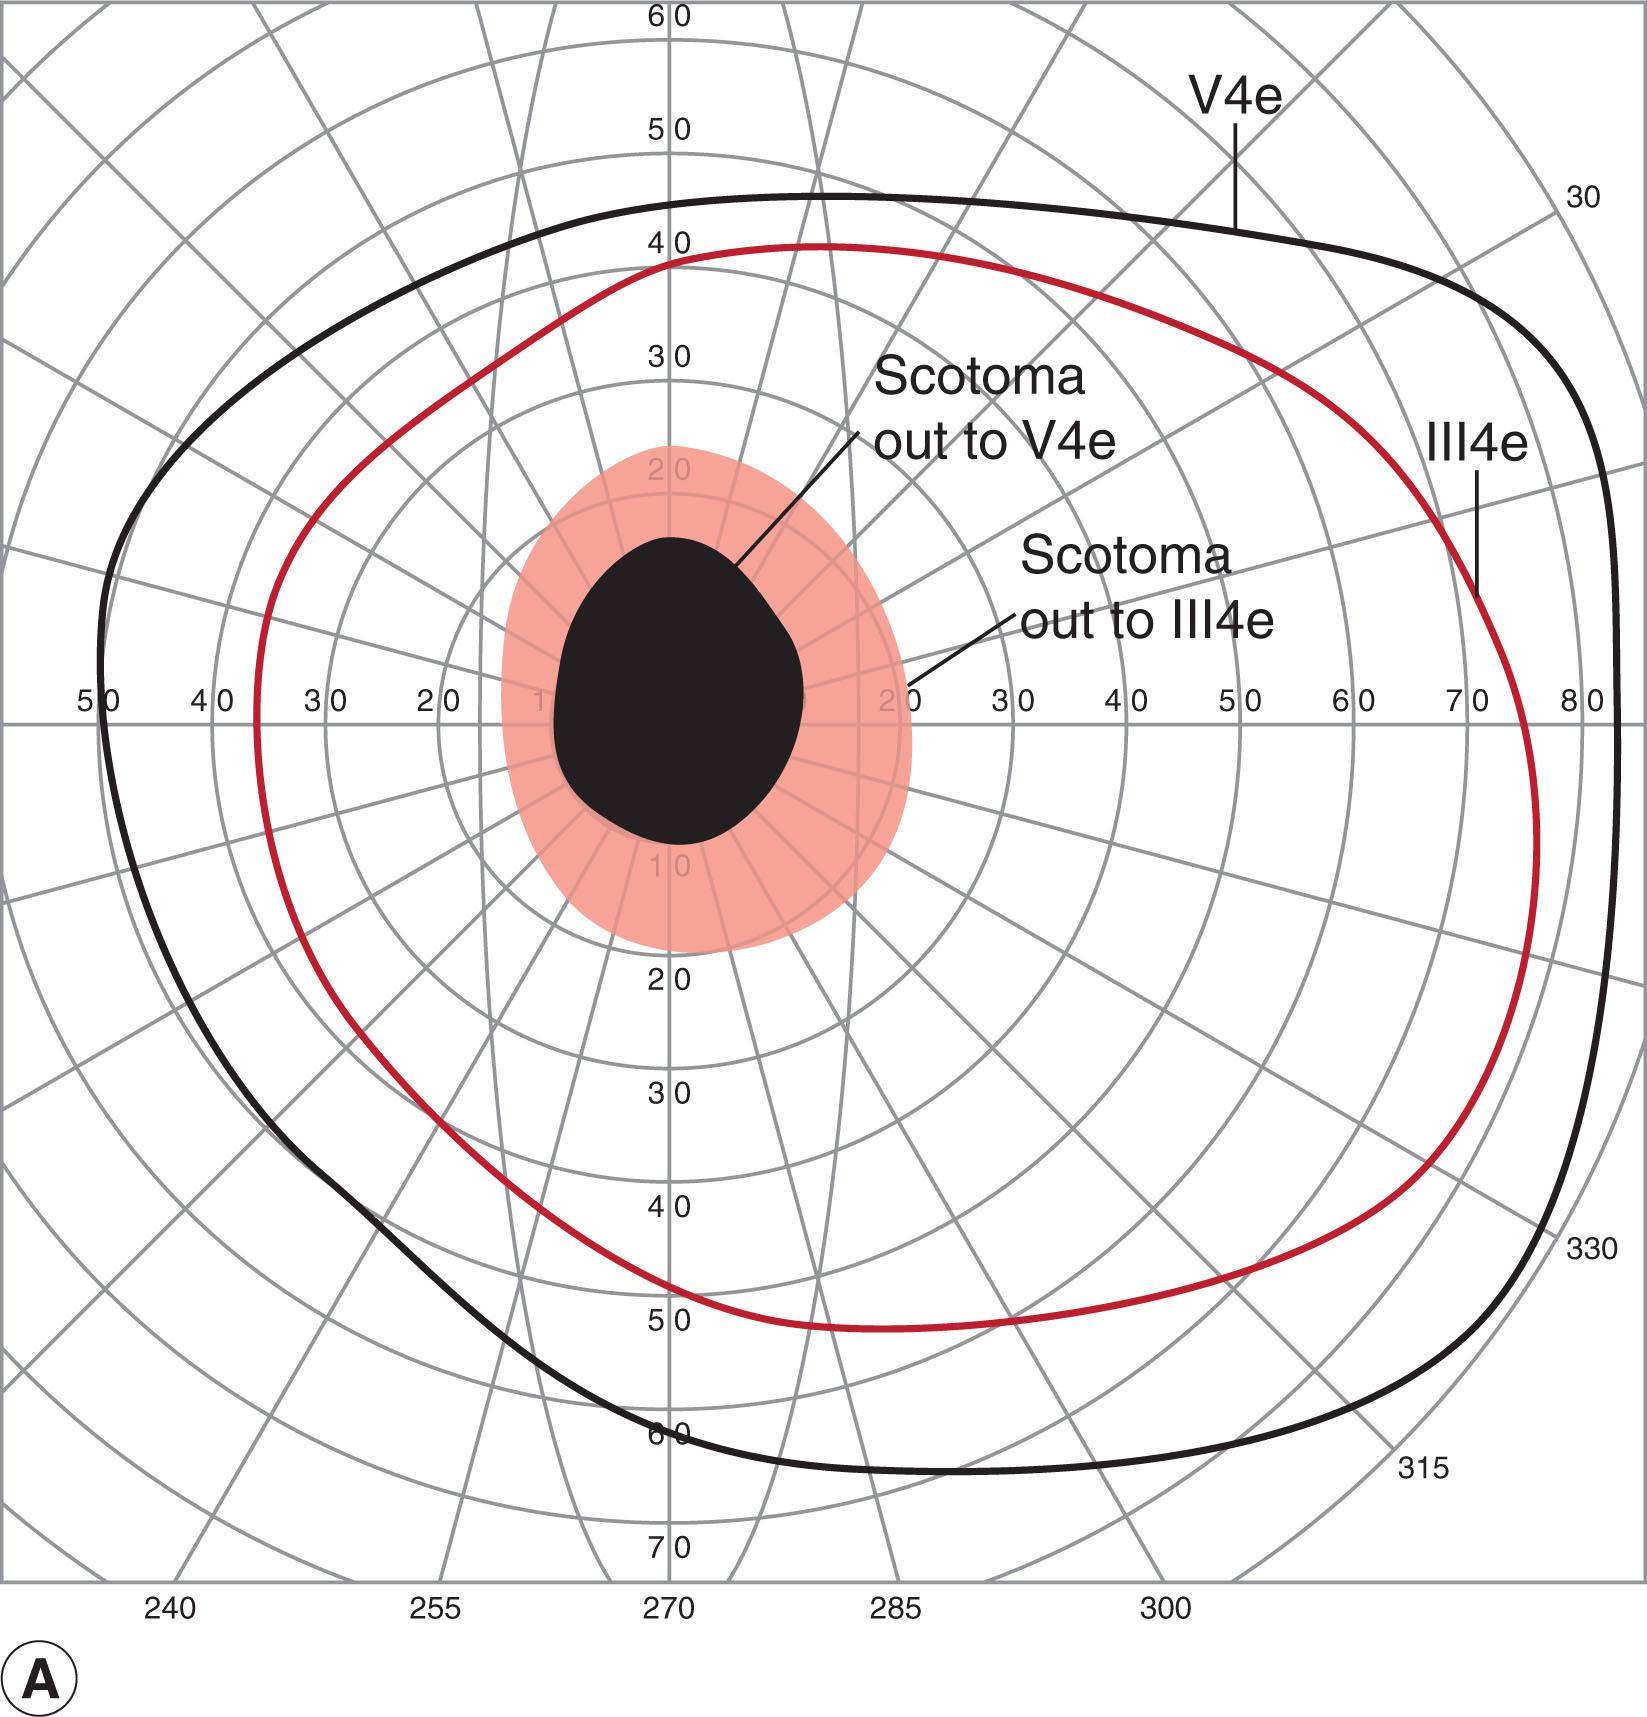 Fig. 56.2, Optic neuritis in a 16-year-old girl. Goldmann visual fields showing central scotoma right eye (A) and optic nerve edema right eye (B) in the setting of subacute vision loss to 20/80 right eye, dyschromatopsia, and a relative afferent pupillary defect right eye.